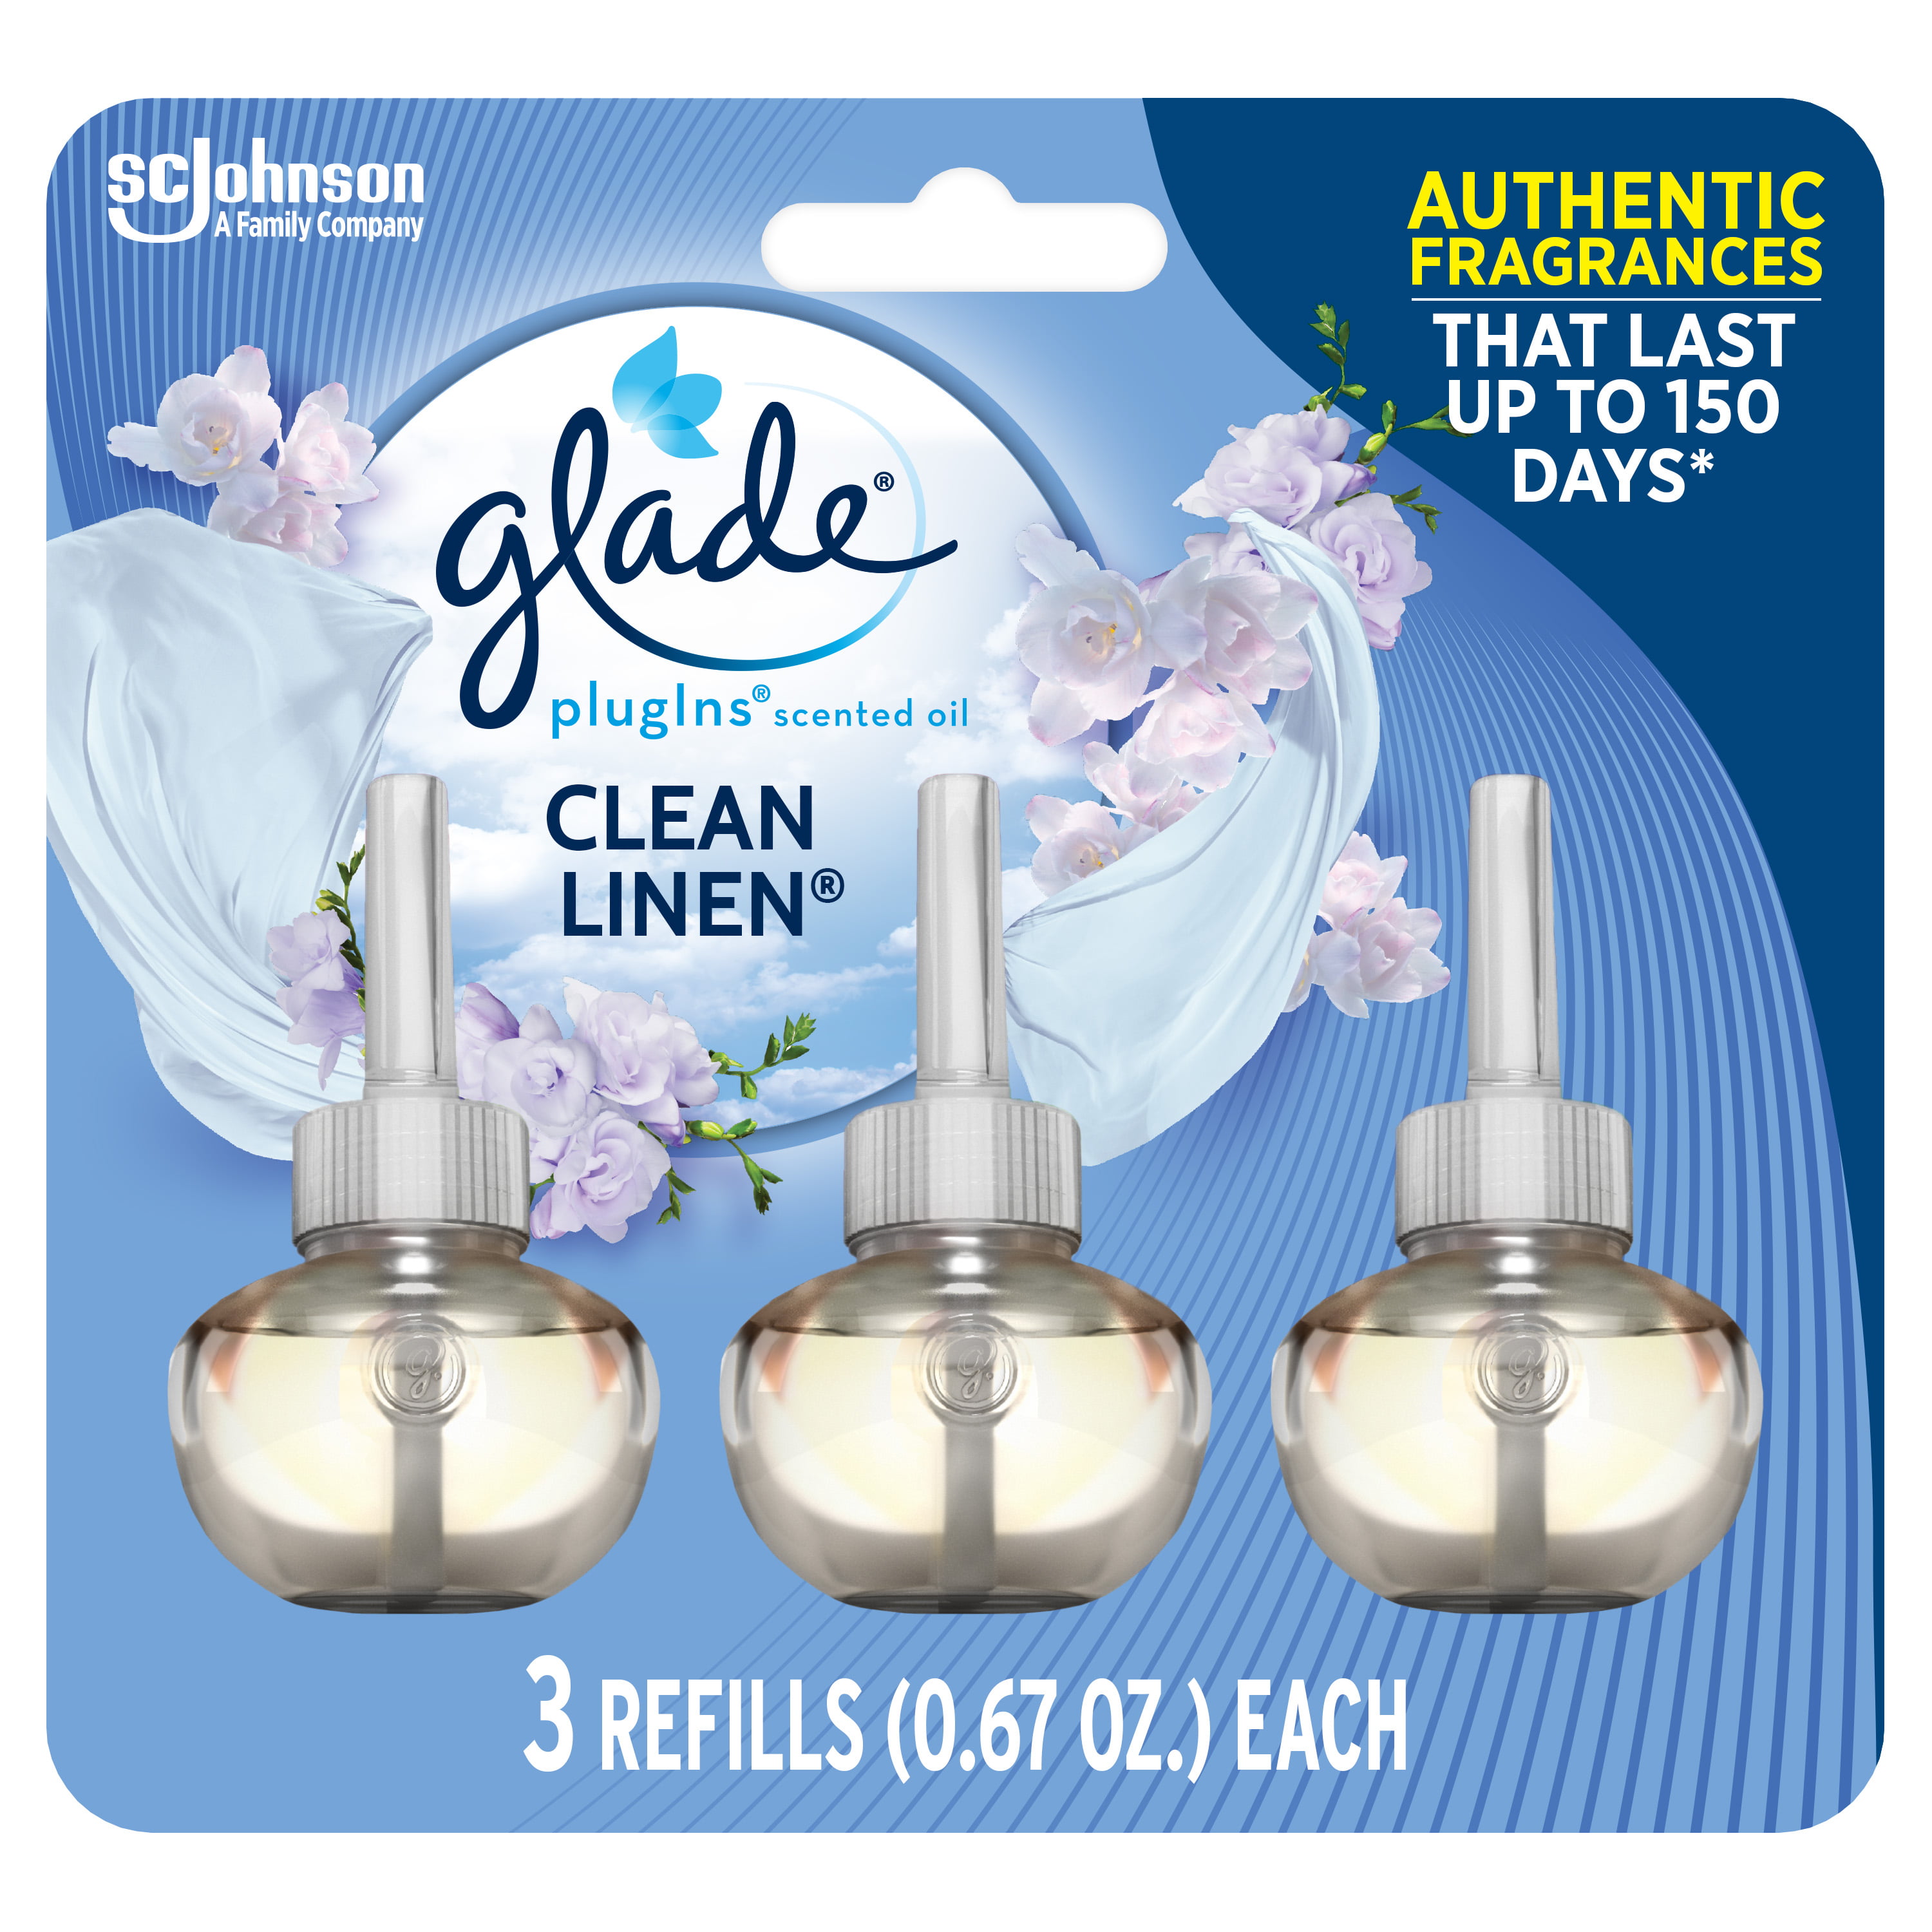 Glade Plugins Refill 3 Ct Clean Linen 2 01 Fl Oz Total Scented Oil Air Freshener Infused With Essential Oils Walmart Com Walmart Com